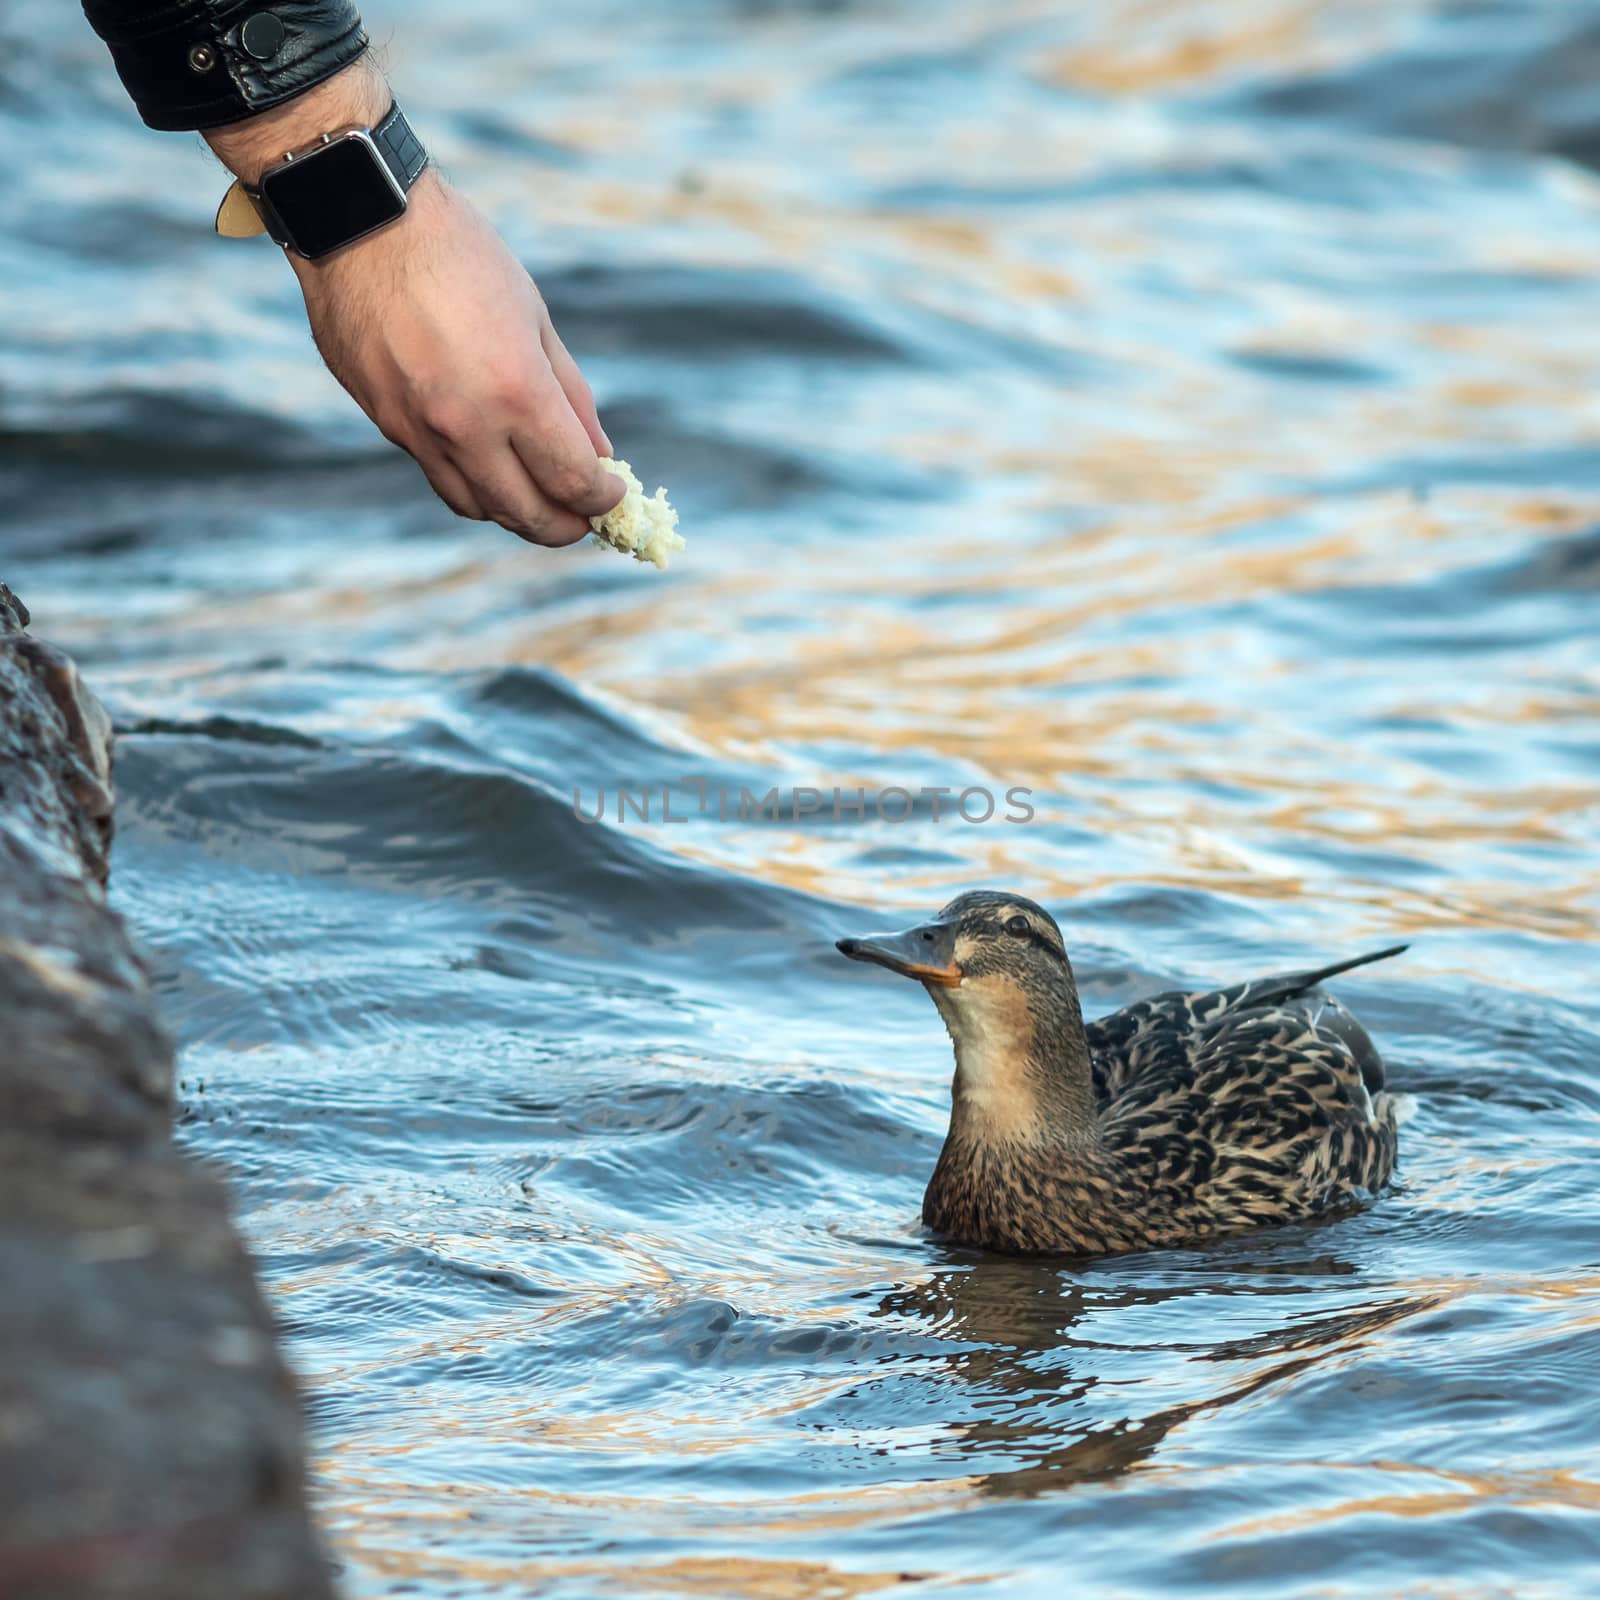 A man feeds a duck from his hand by sveter